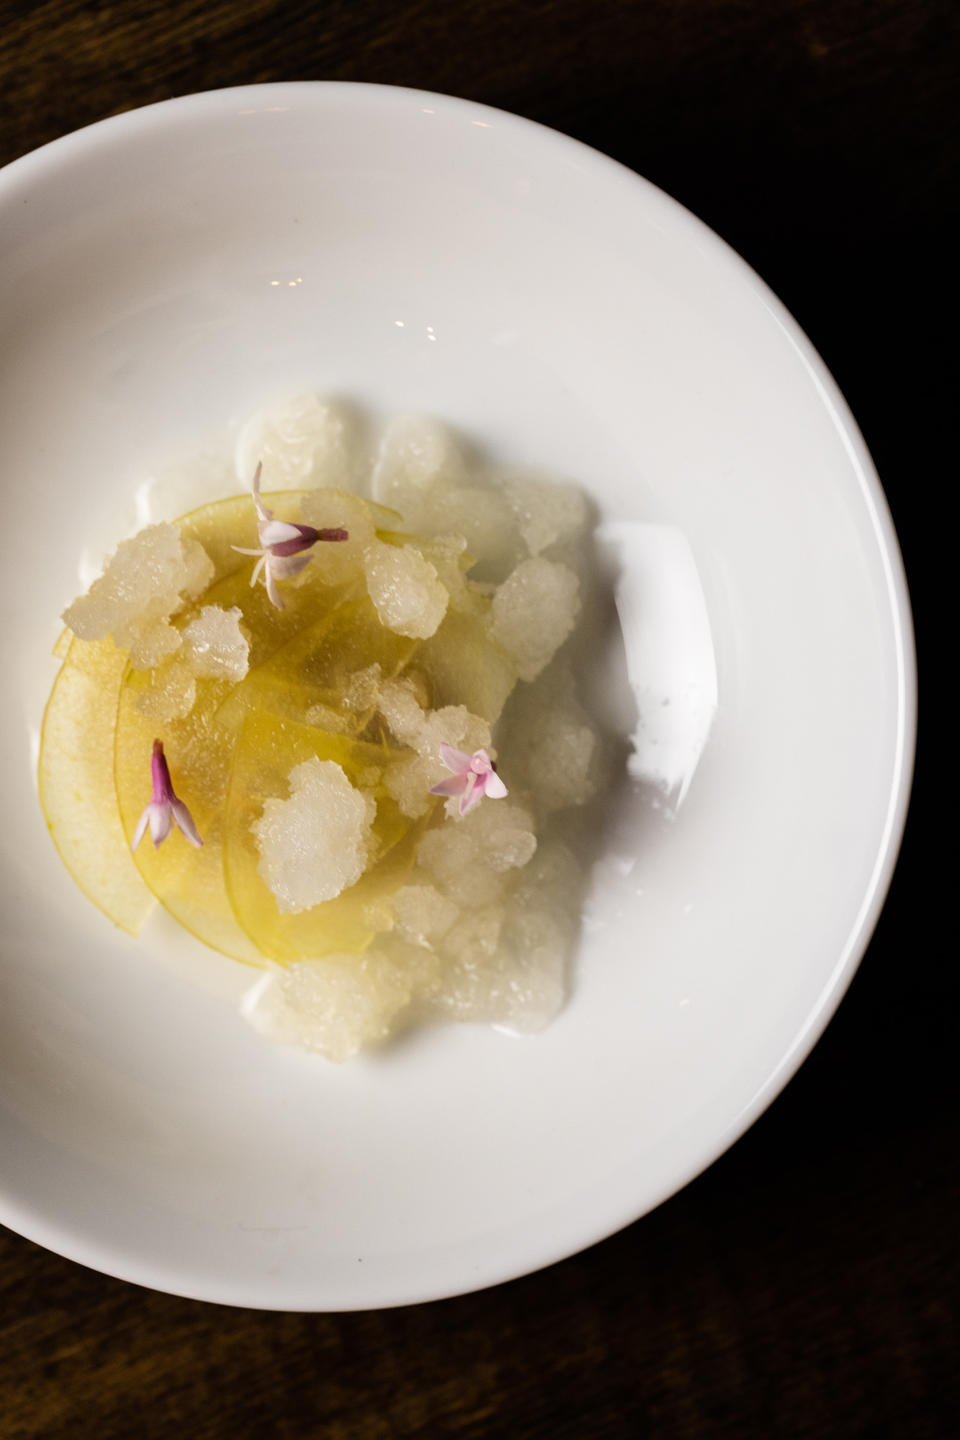 A dish at Michelin-starred restaurant Clover Hill in Brooklyn Heights. (Natalie Black Photography)